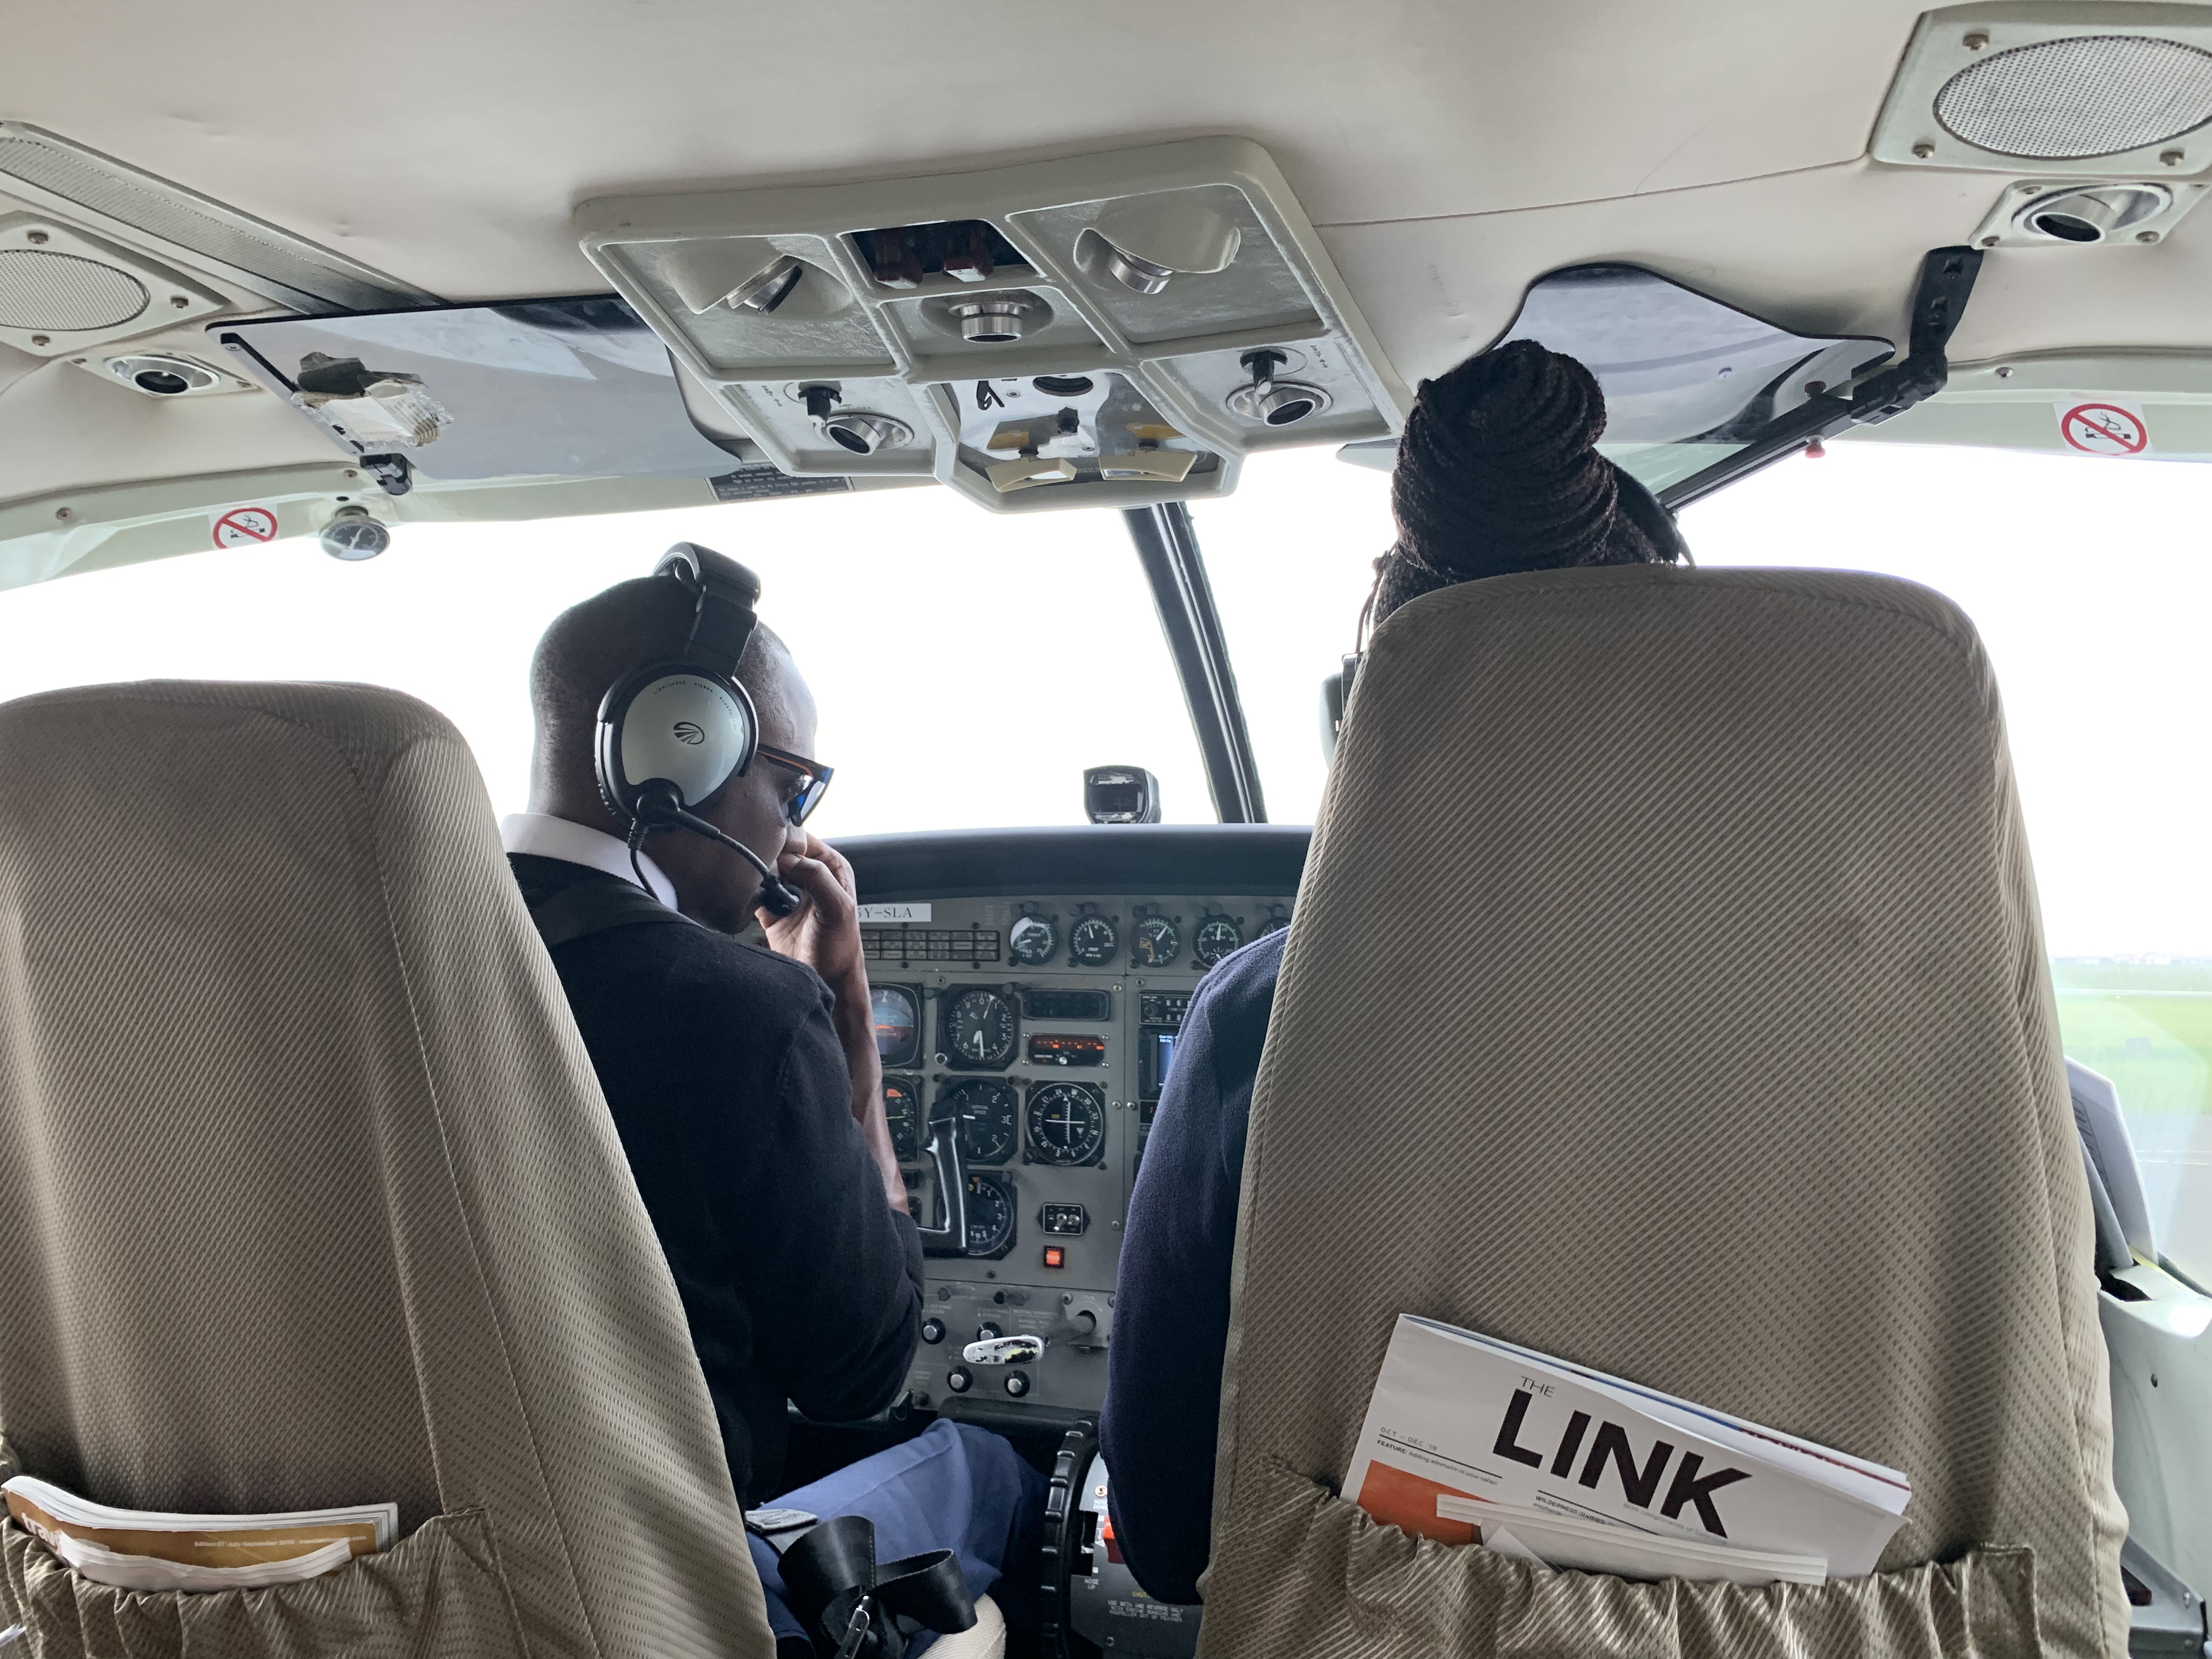 Kenya Bush Plane Review: Safarilink - Everything you need to know about flying Kenya's domestic safari airline, including regulations and my honest review! | Safarilink Review - Safarilink Kenya - Safarilink planes - Bush plane - Bush Plane Review - Best Bus Plane Africa